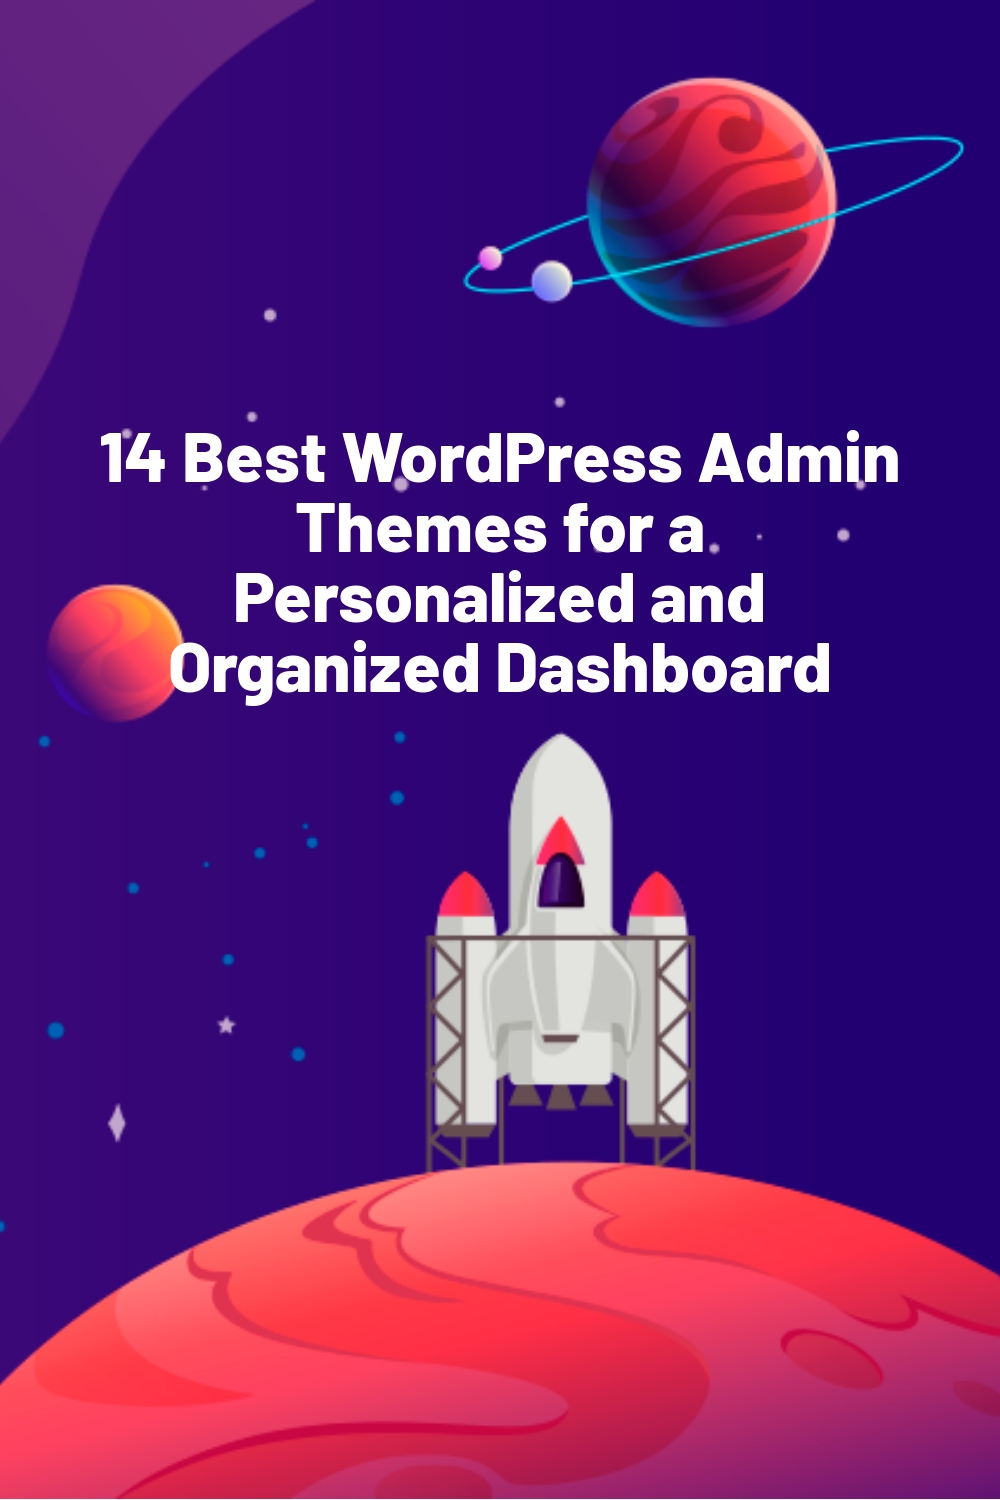 14 Best WordPress Admin Themes for a Personalized and Organized Dashboard